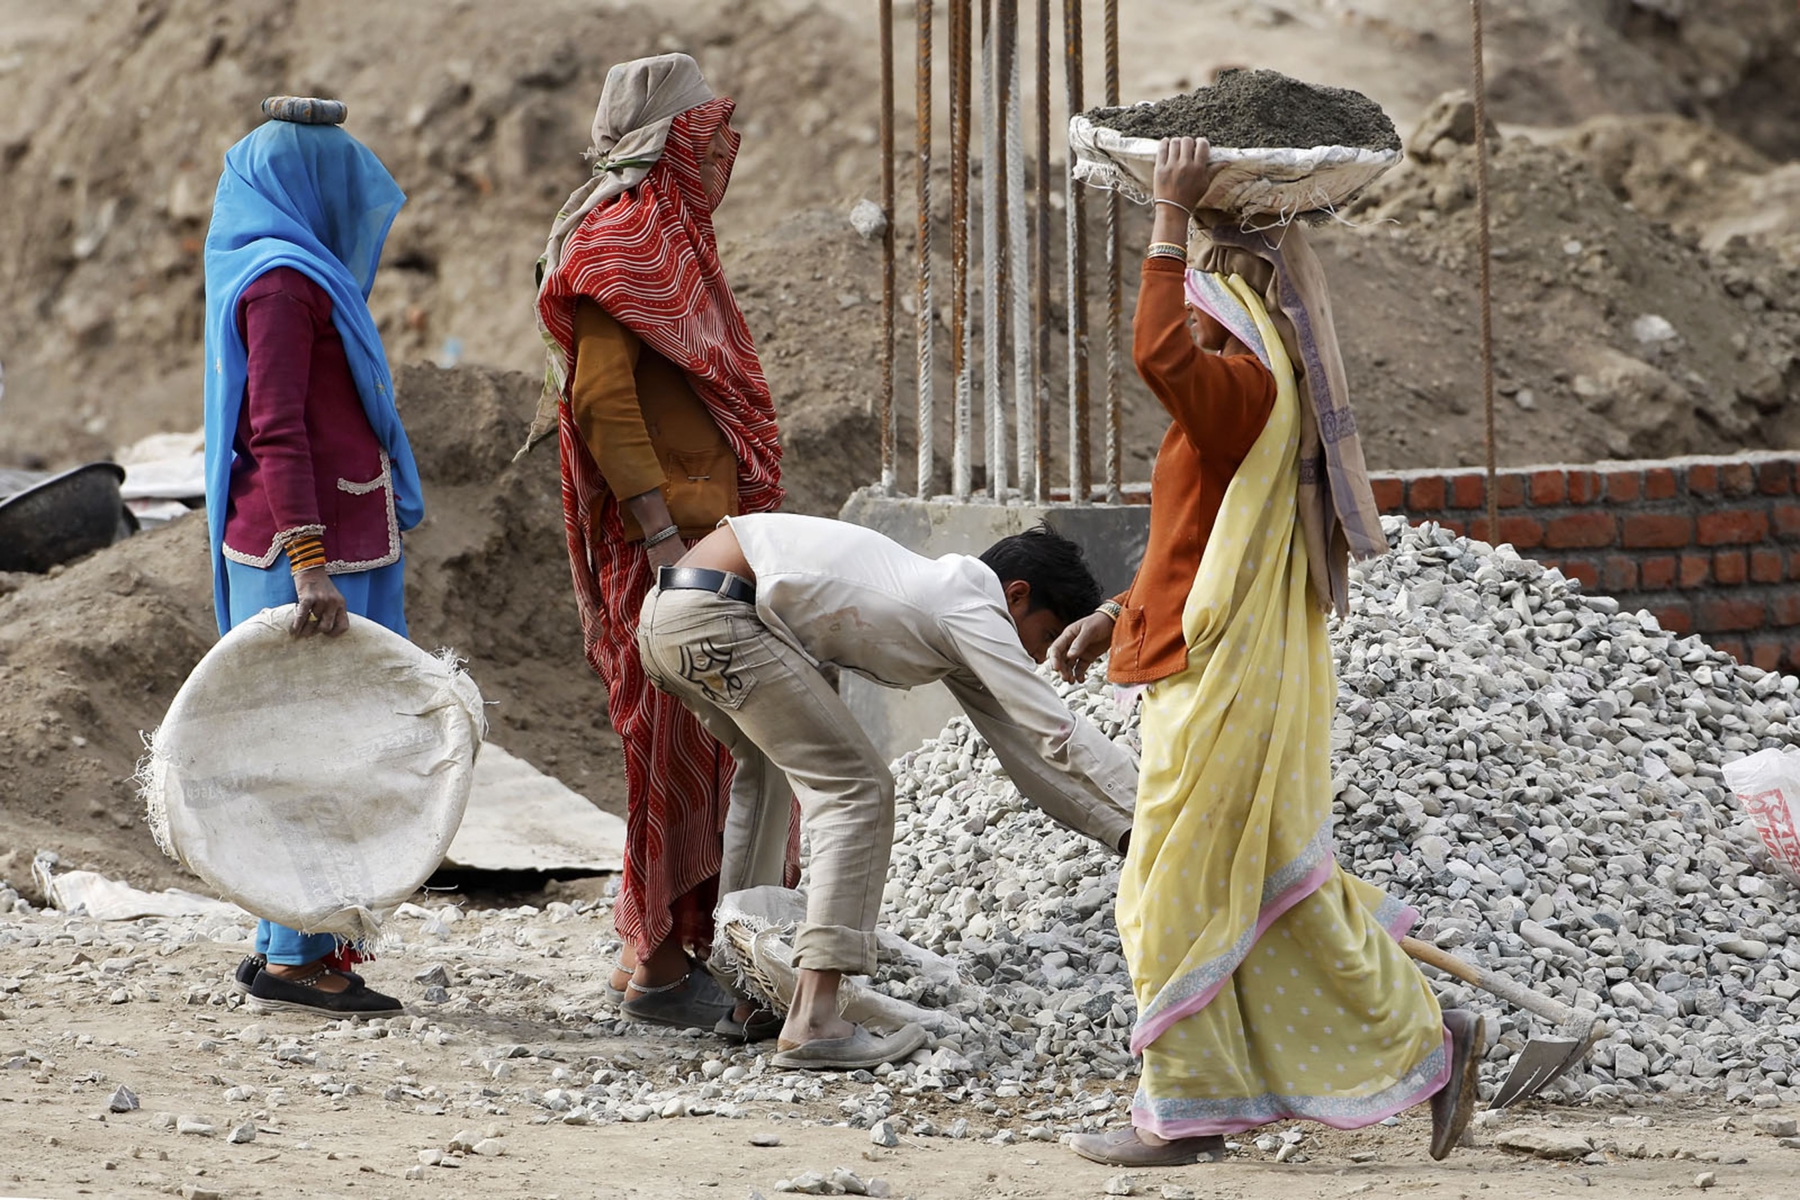 In India, Woman are the Major Work Force. Here Carrying Material to the Cement Mixer